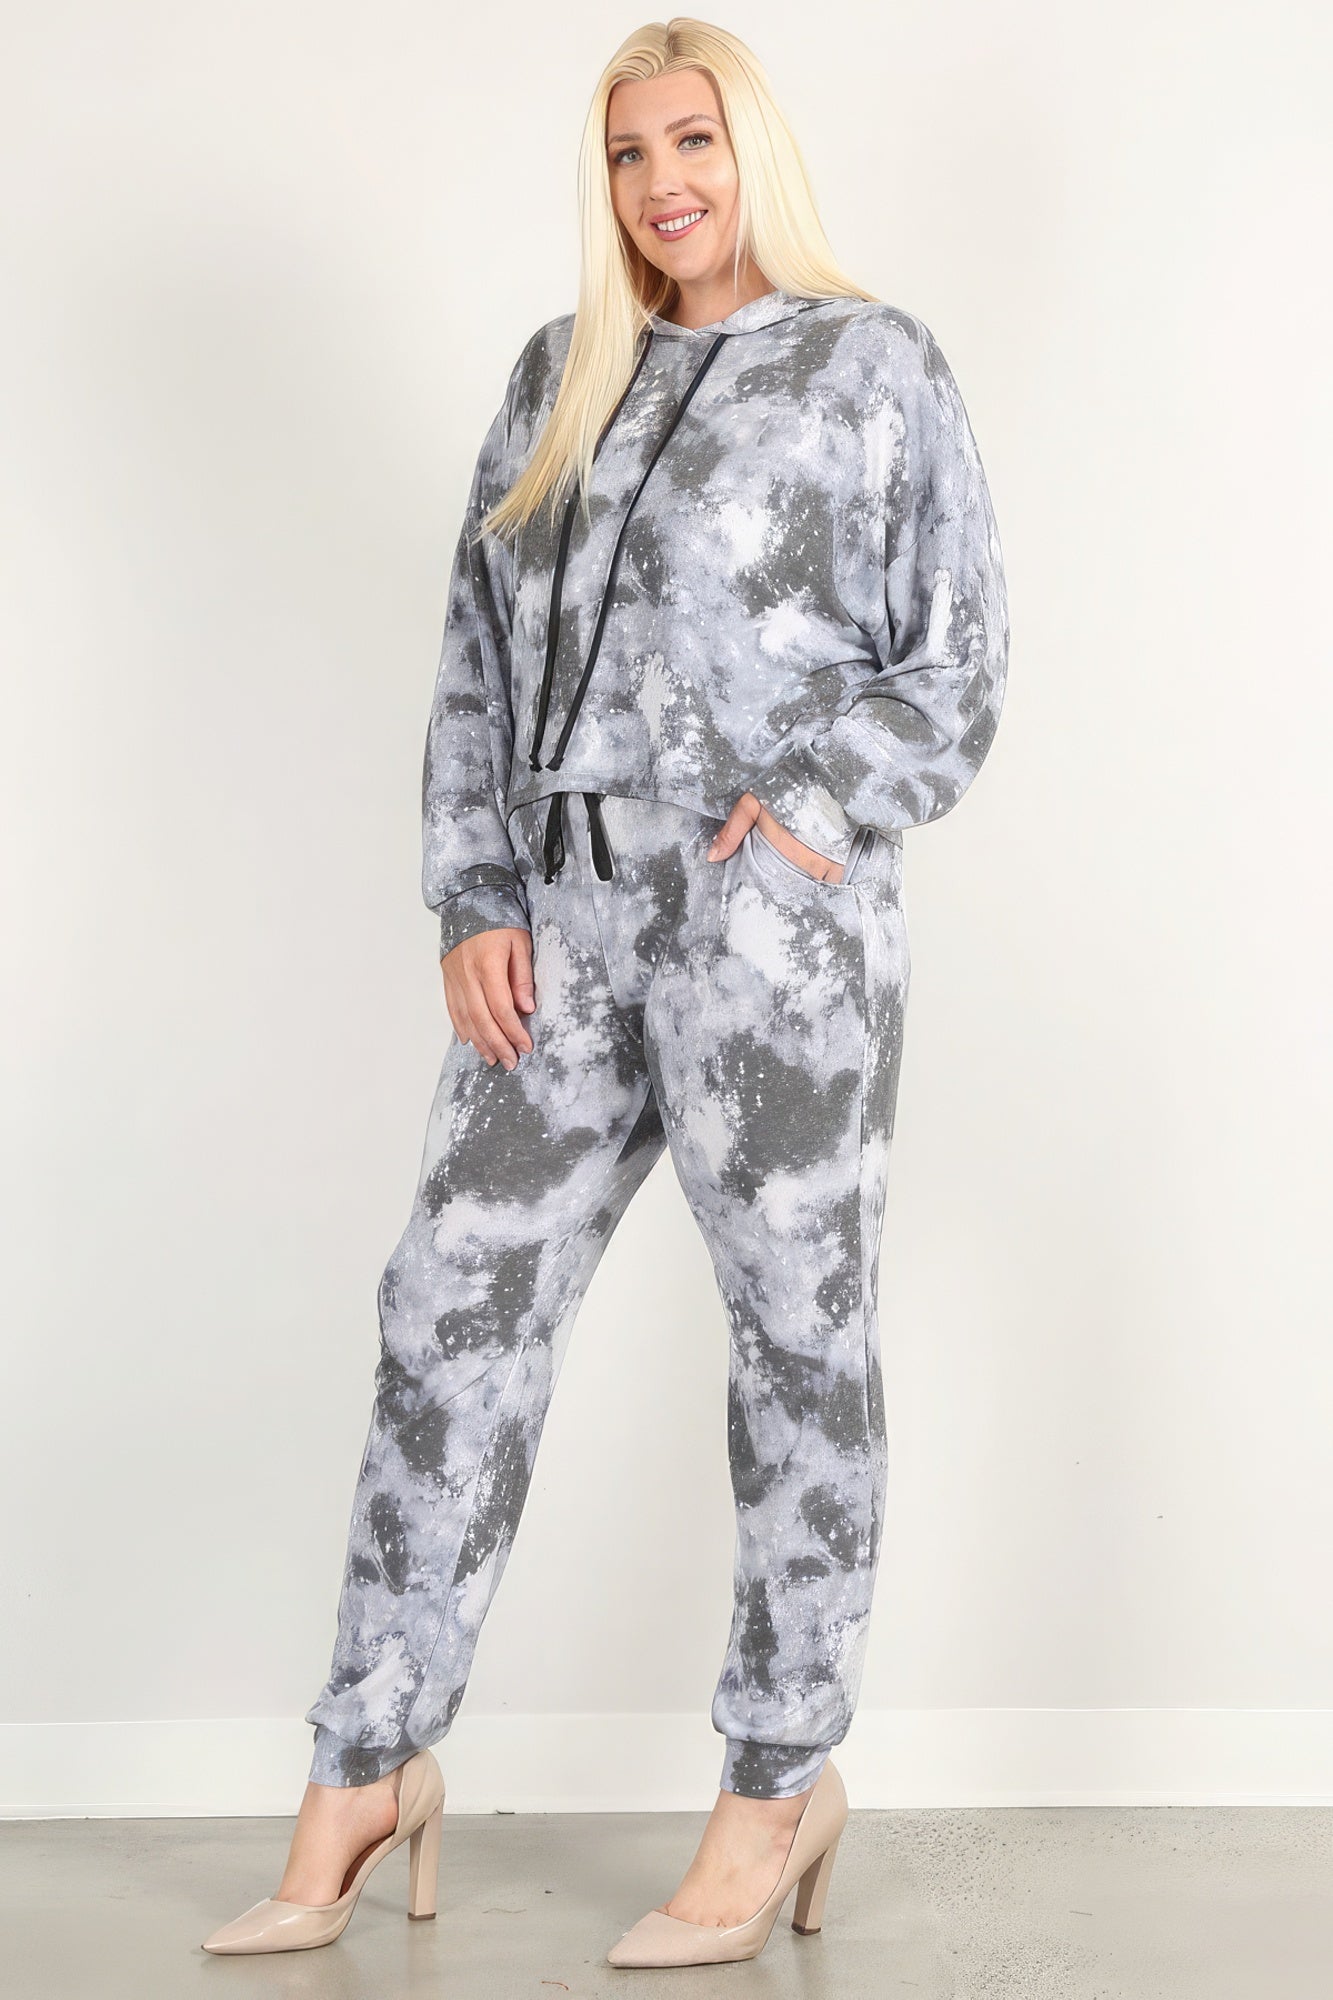 THE MOLLIE Tie Dye Print Pullover Hoodie And Sweatpants